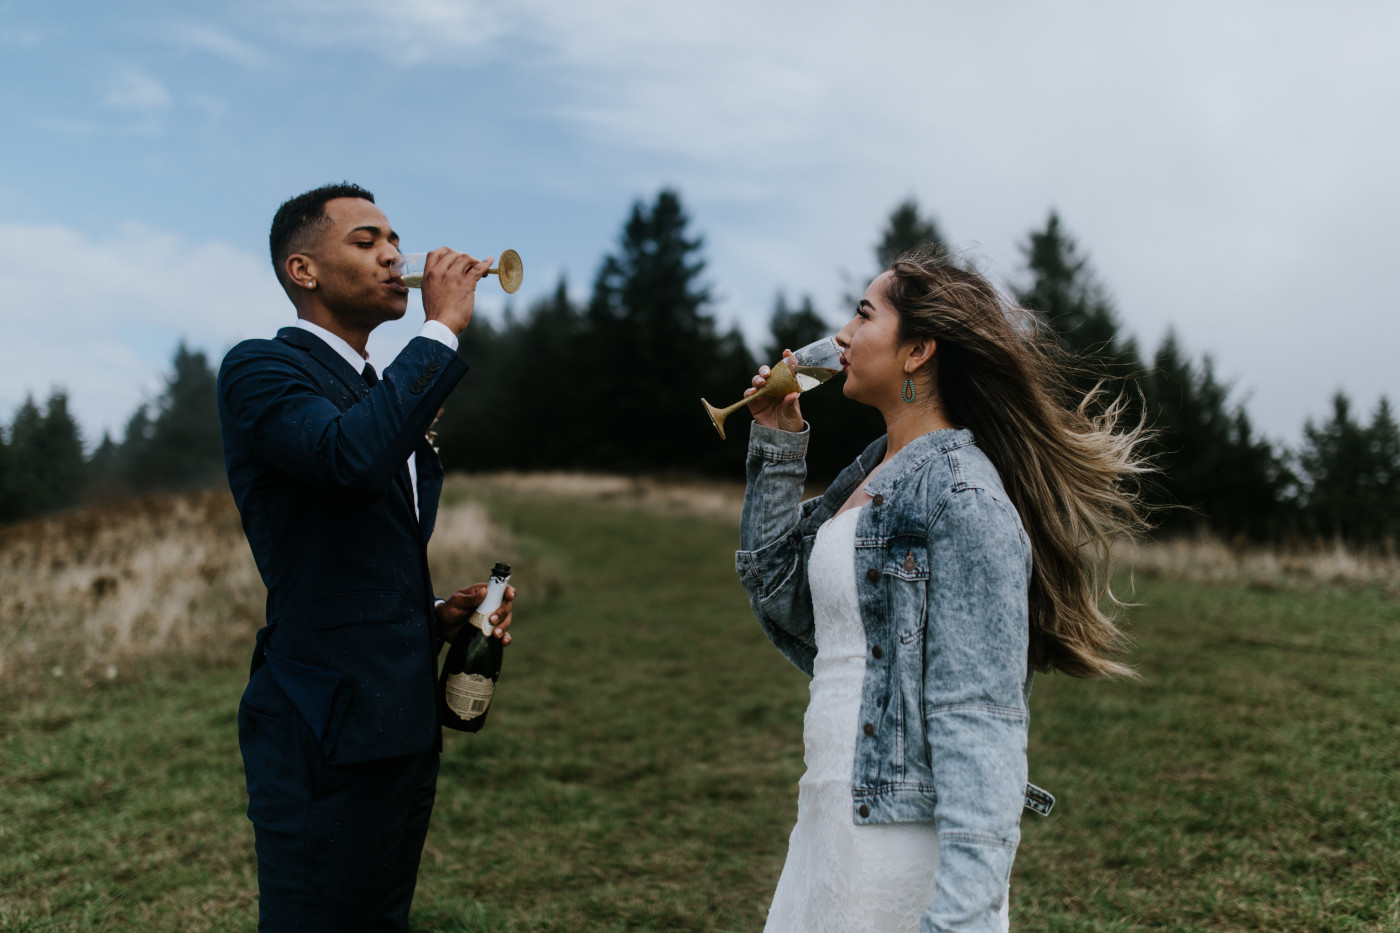 Deandre and Ariana share a toast to their elopement. Elopement photography at Mount Hood by Sienna Plus Josh.